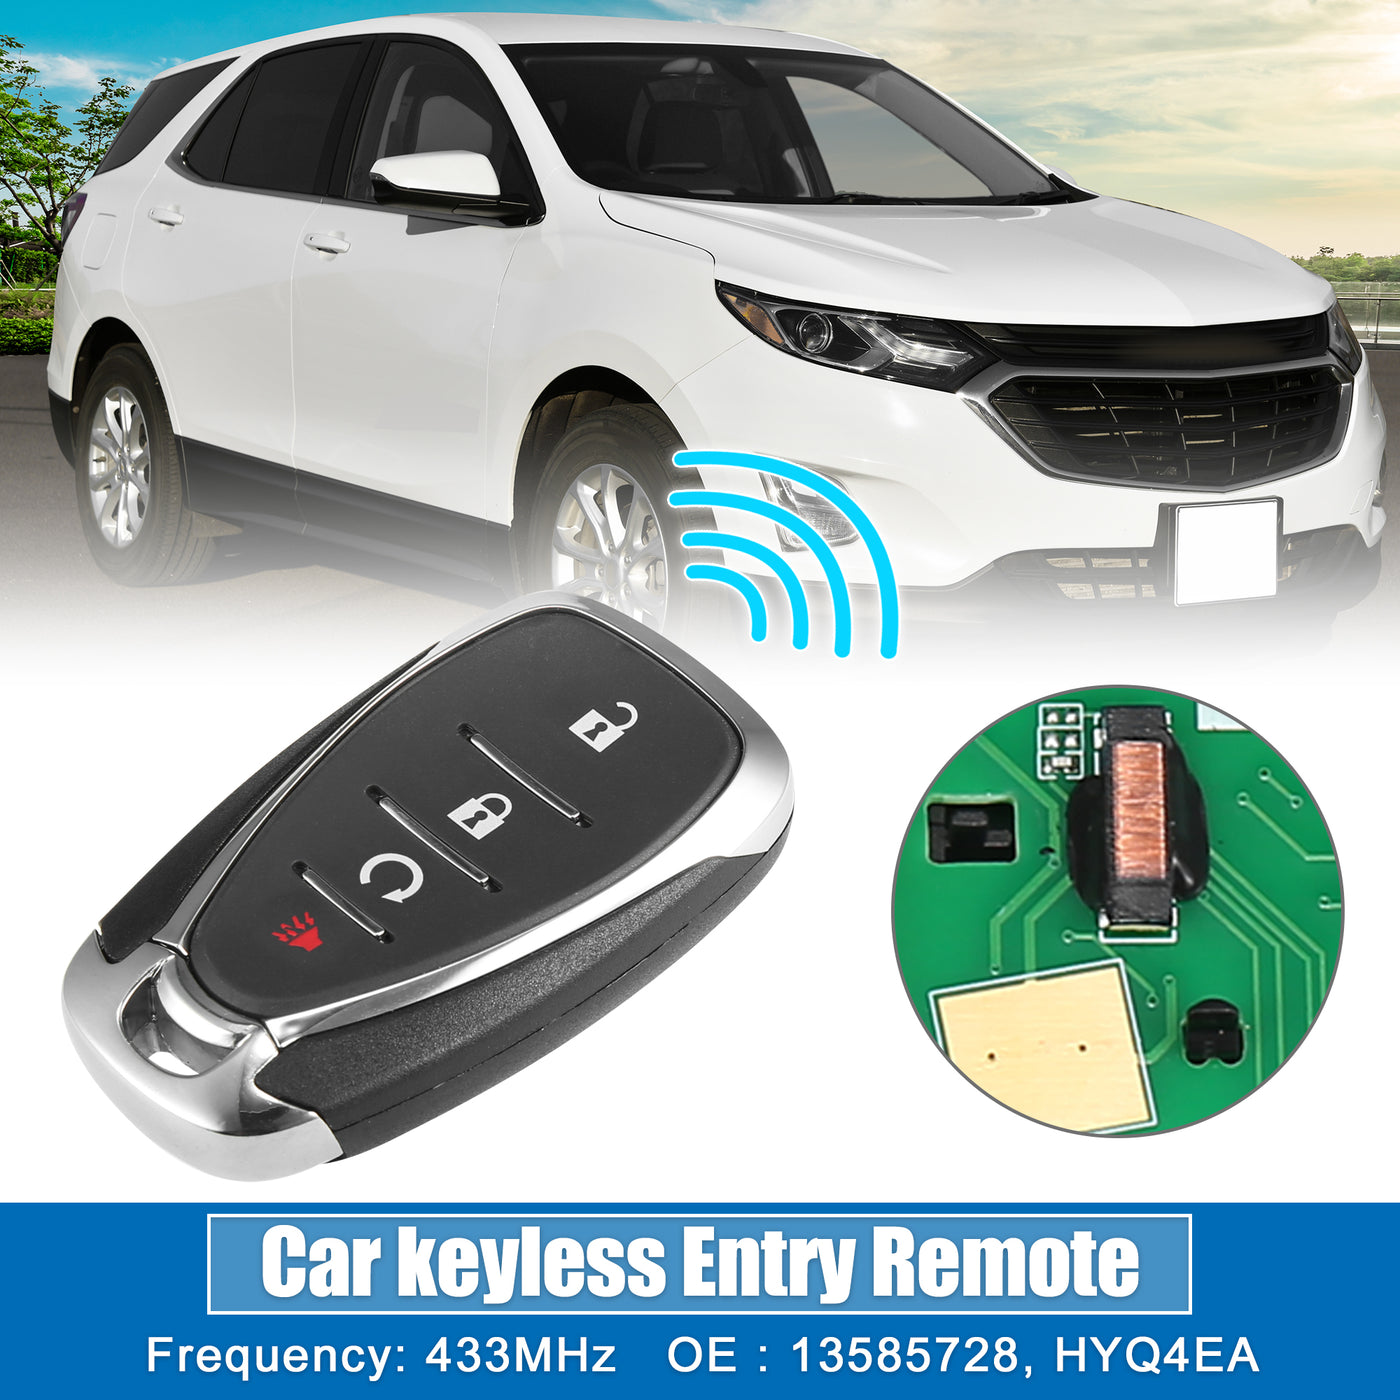 X AUTOHAUX 4 Button Car Keyless Entry Remote Control Replacement Key Fob Proximity Smart Fob HYQ4EA for Chevrolet Volt 2017-2019 433MHz 46 Chip